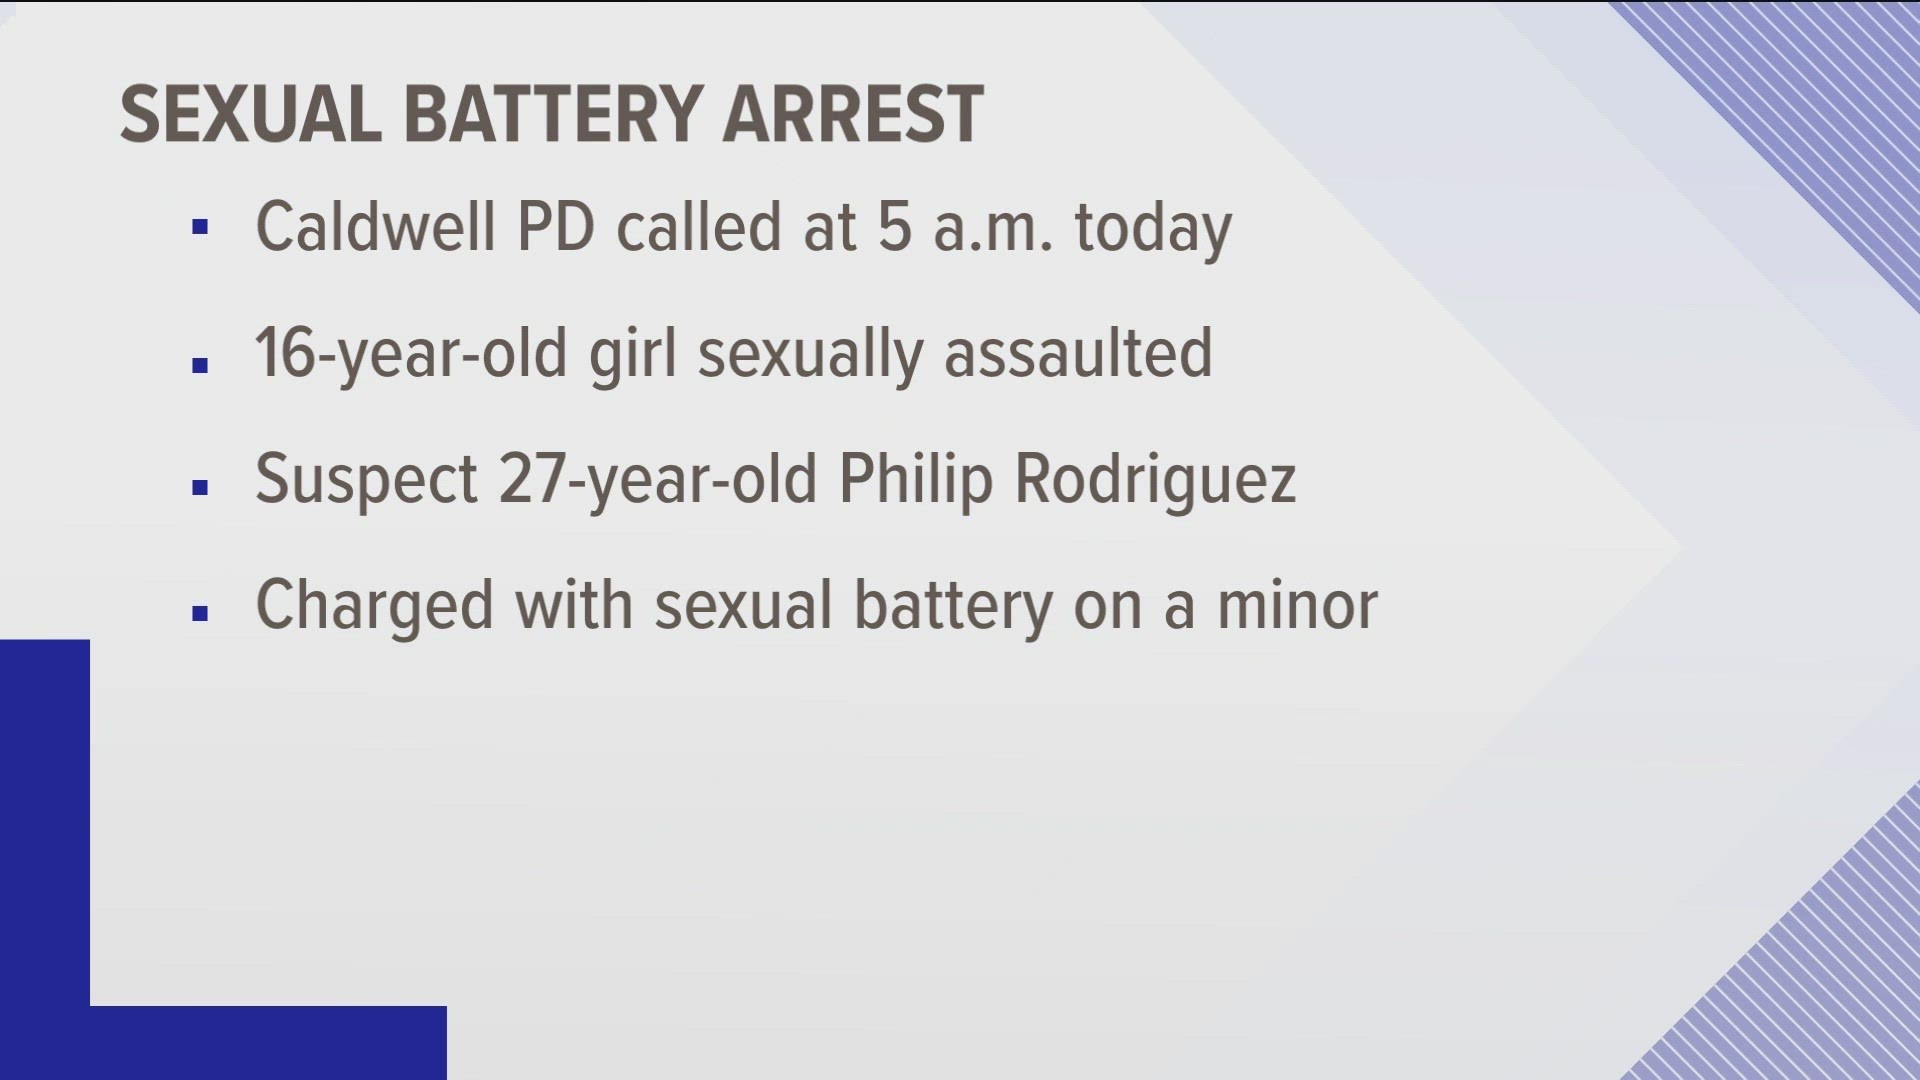 Boise and Caldwell Police conducted an operation to apprehend the suspect, the charges are sexual battery on a minor child who was 16 or 17-years old.